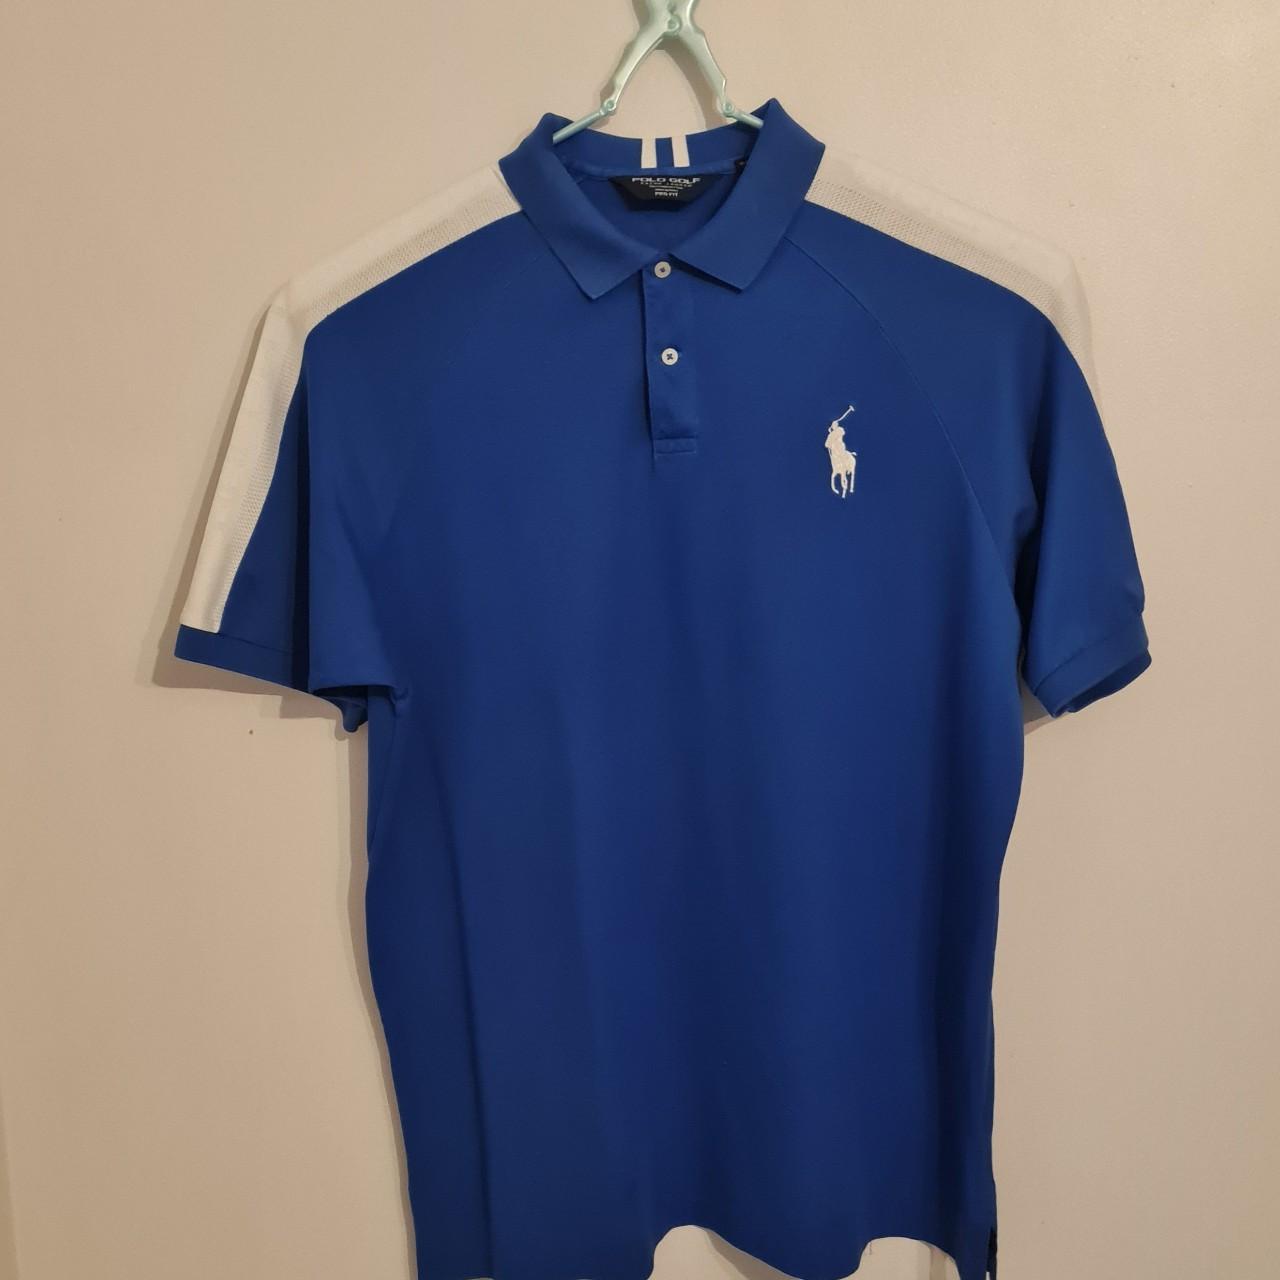 Vintage Ralph lauren polo golf blue and white polo... - Depop